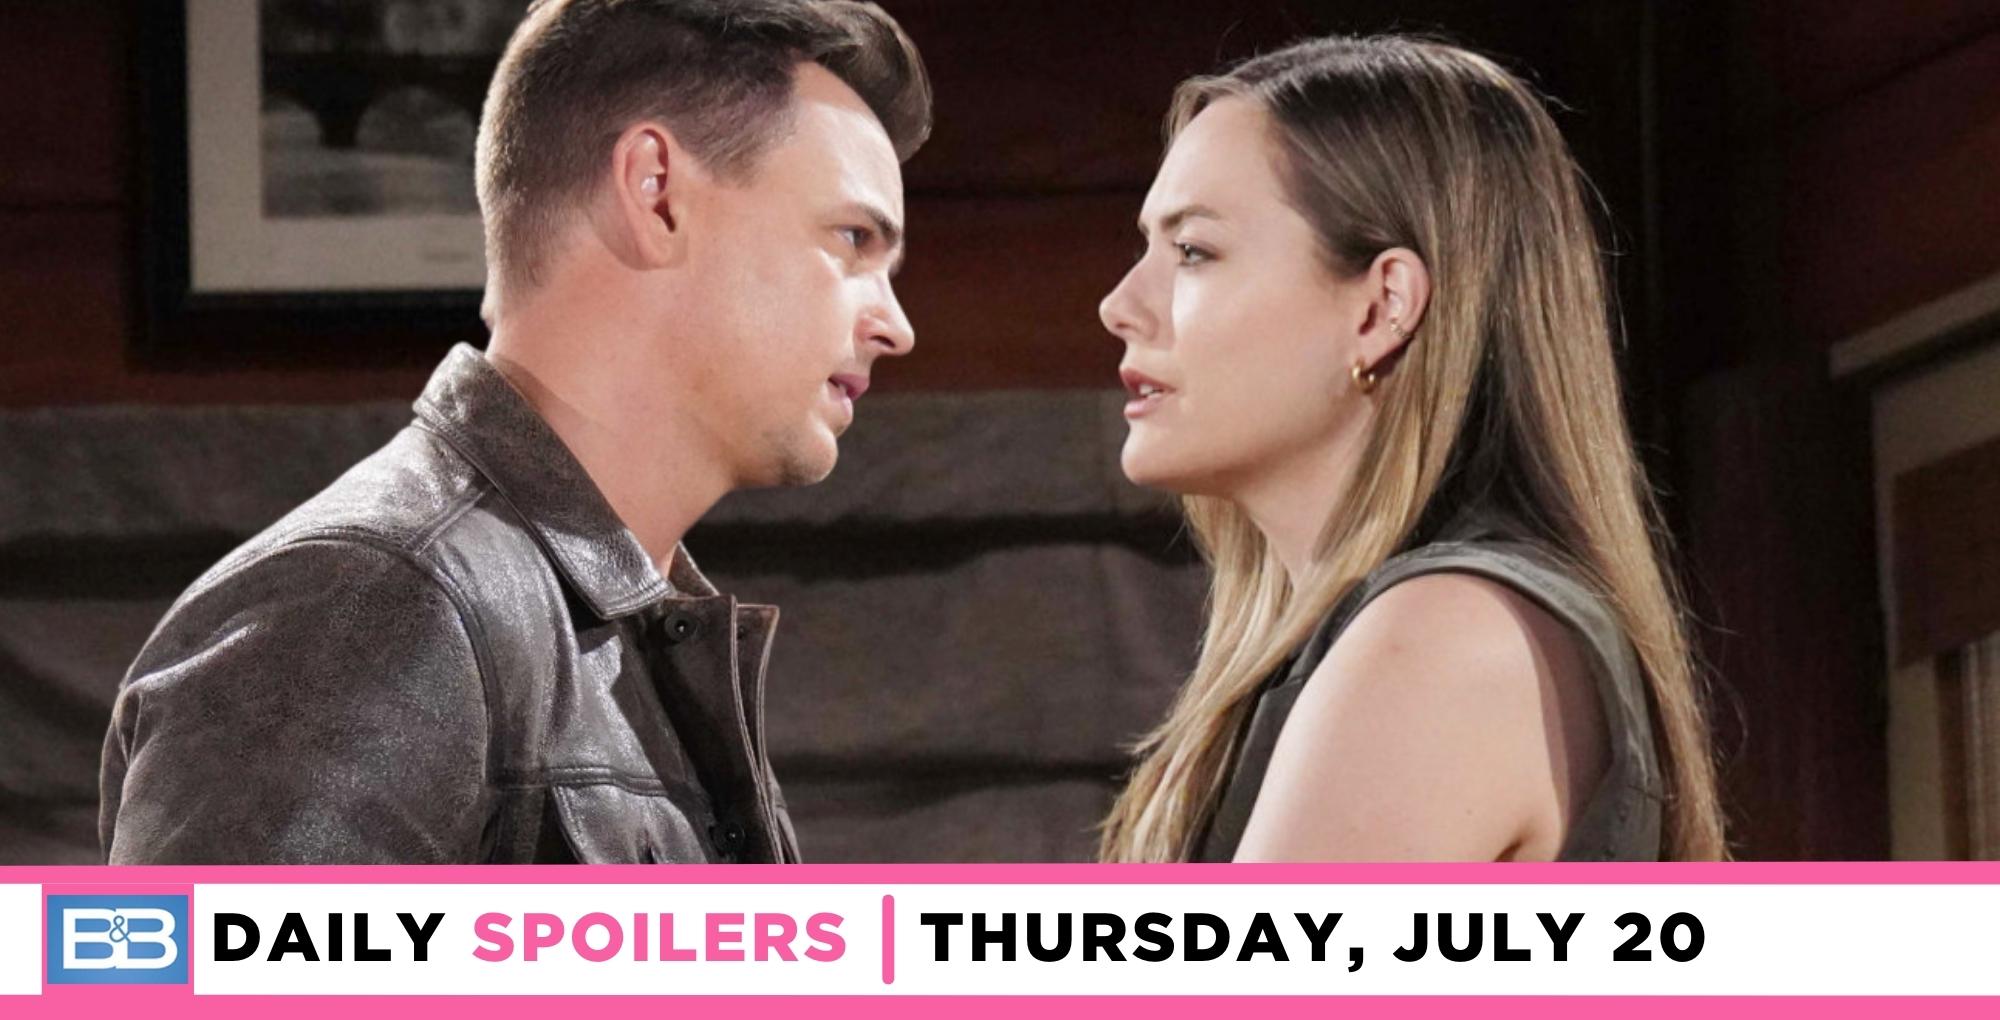 the bold and the beautiful spoilers have wyatt confronting hope.